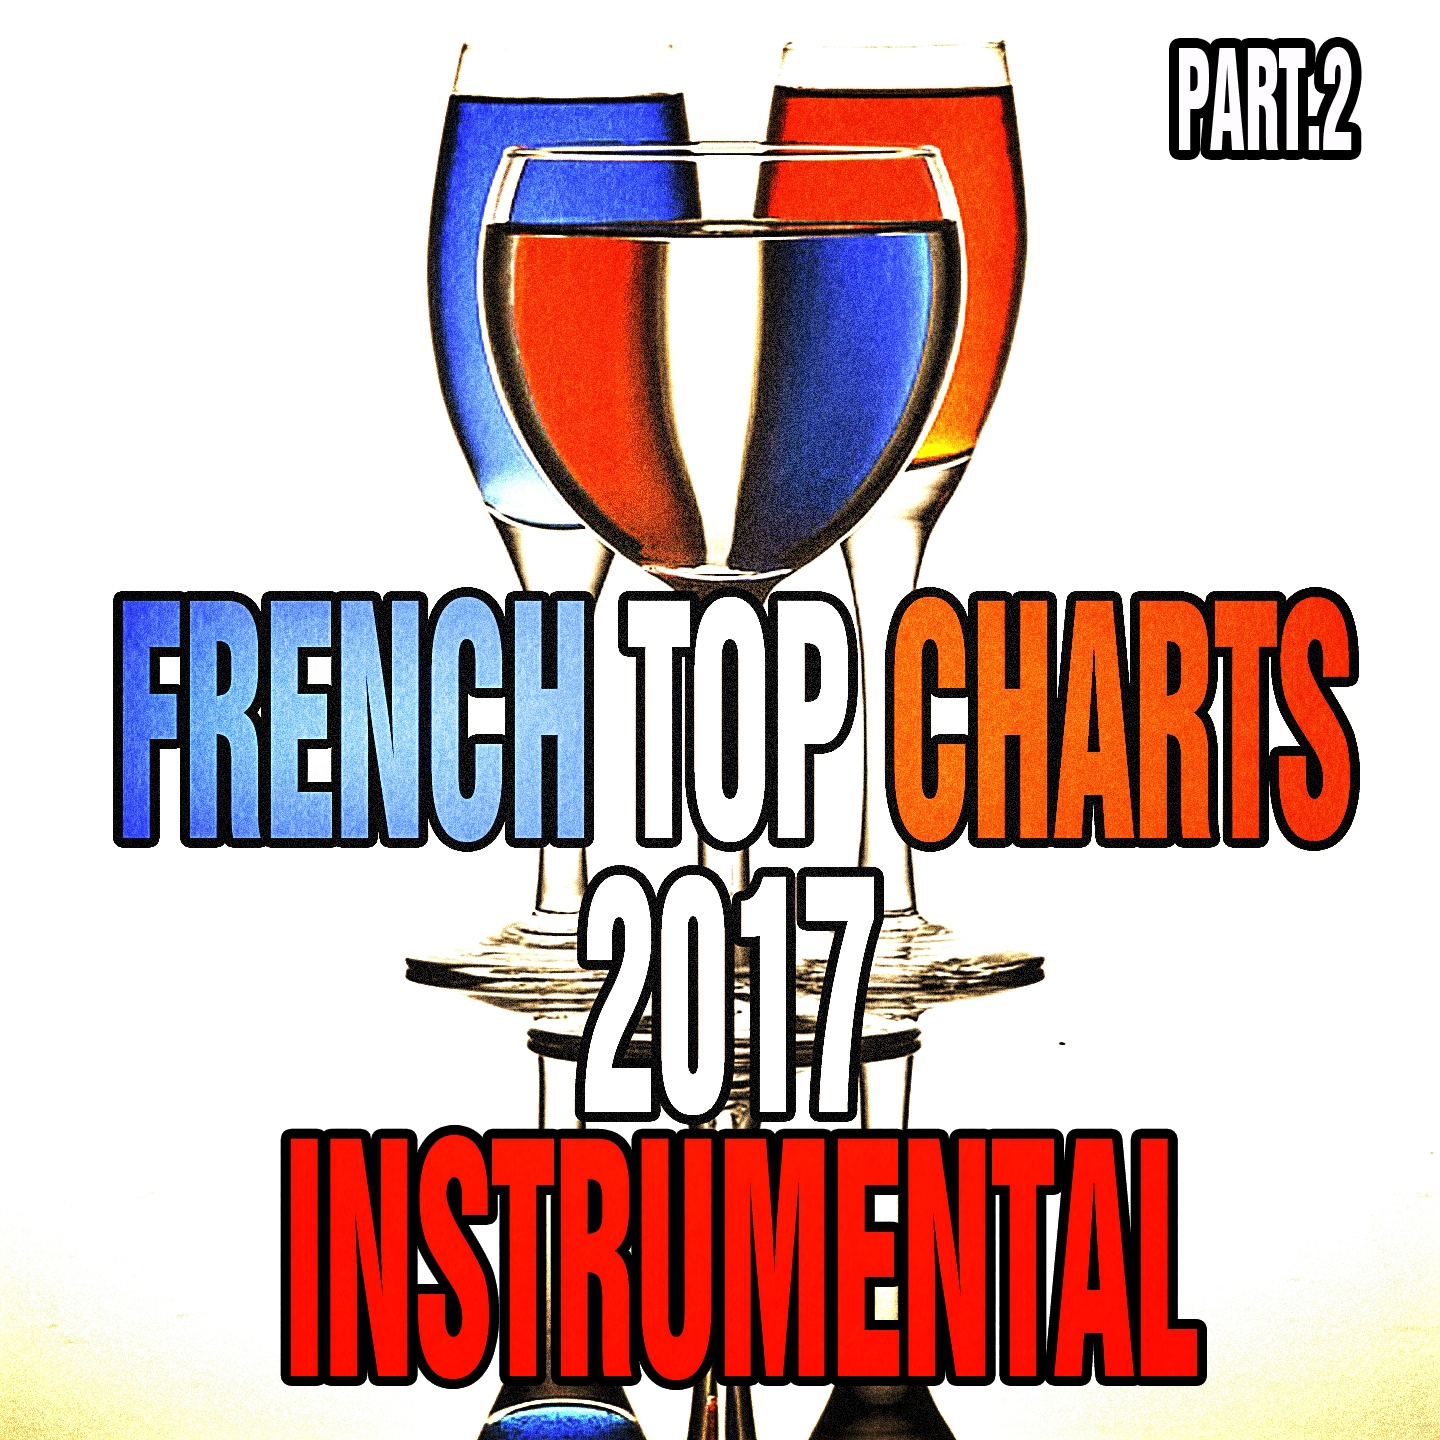 French Top Charts Instrumental 2017 Part.2